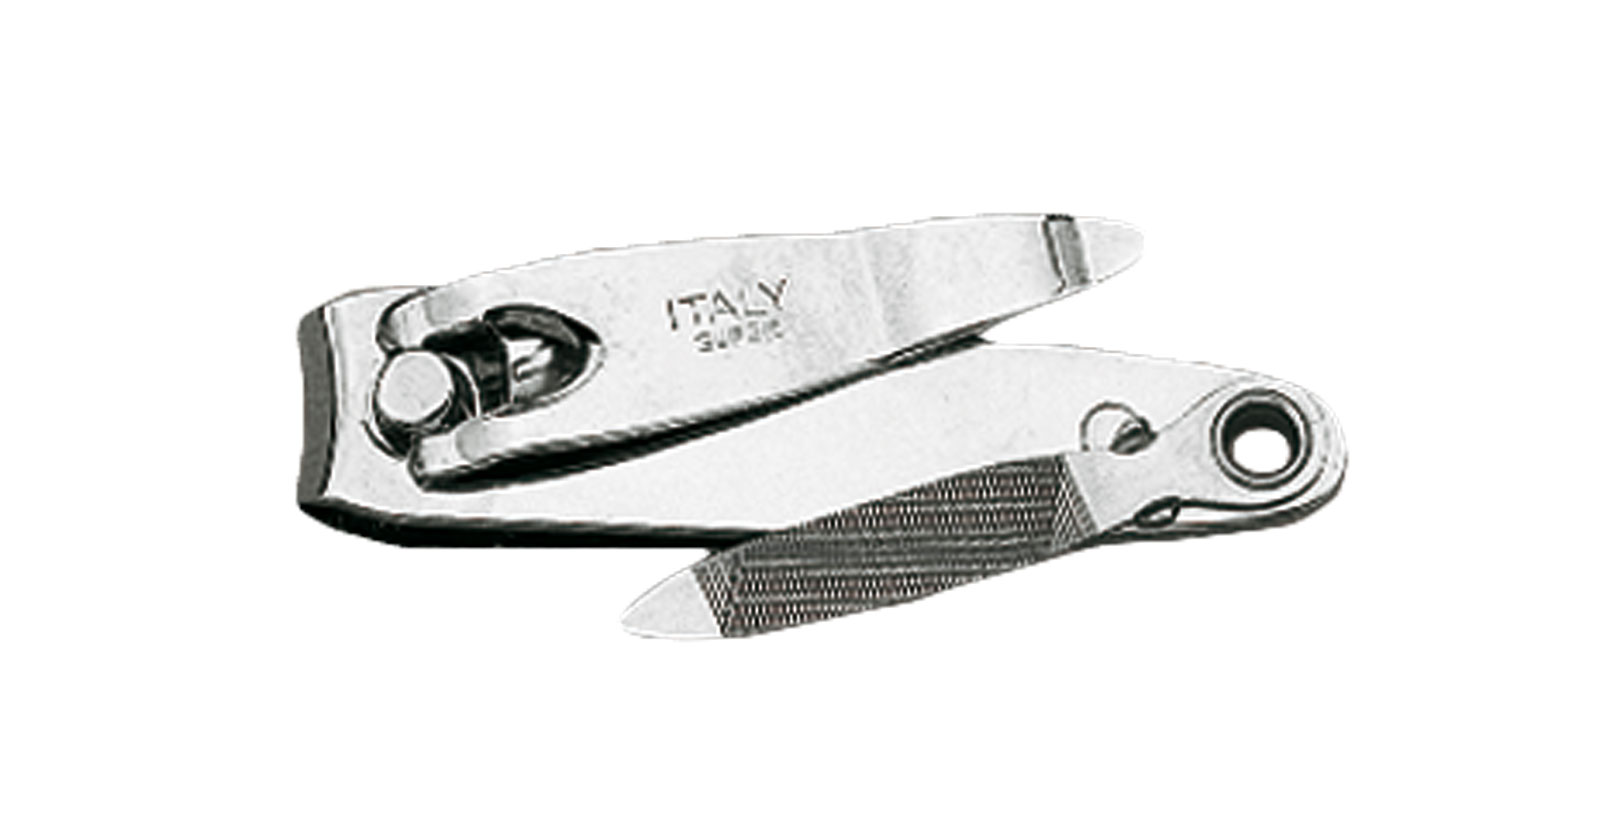 Buy [Made in Korea]ROYAL 12pcs Nail clippers with knife & opener, Chain  Online at Low Prices in India - Amazon.in